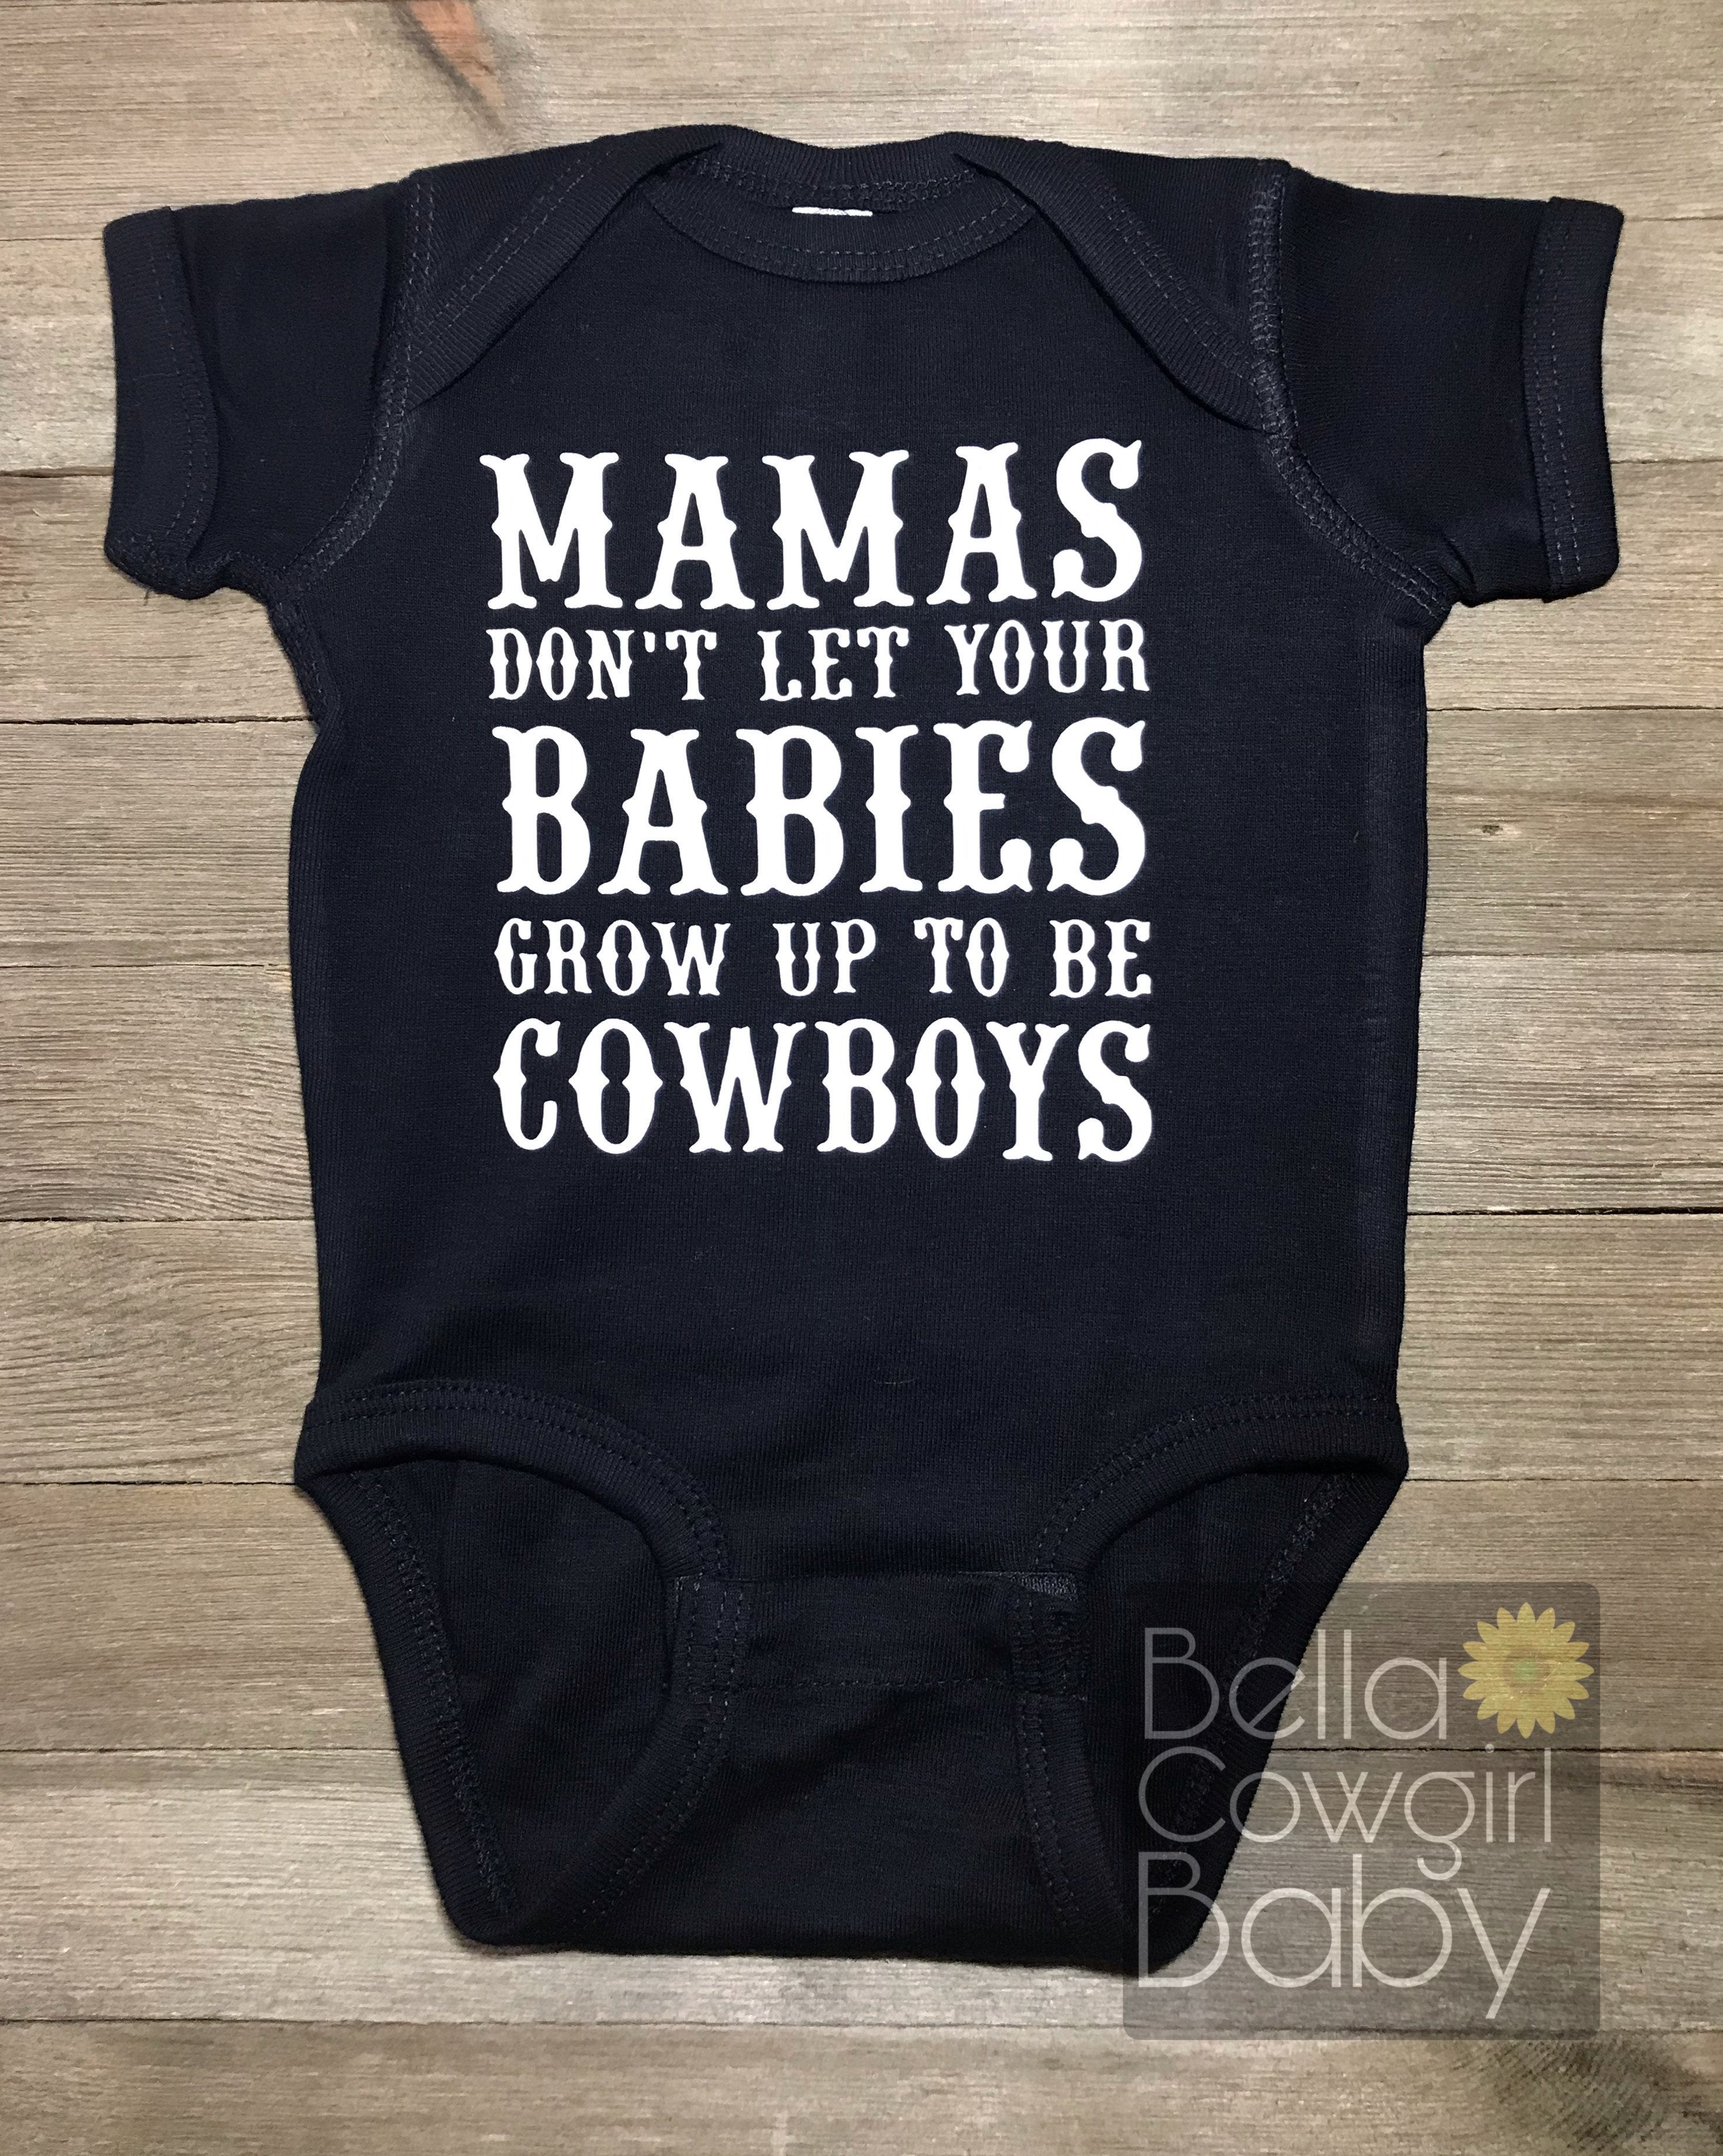 Cowboy Lifestyle Network - Let your babies grow up to be cowboys